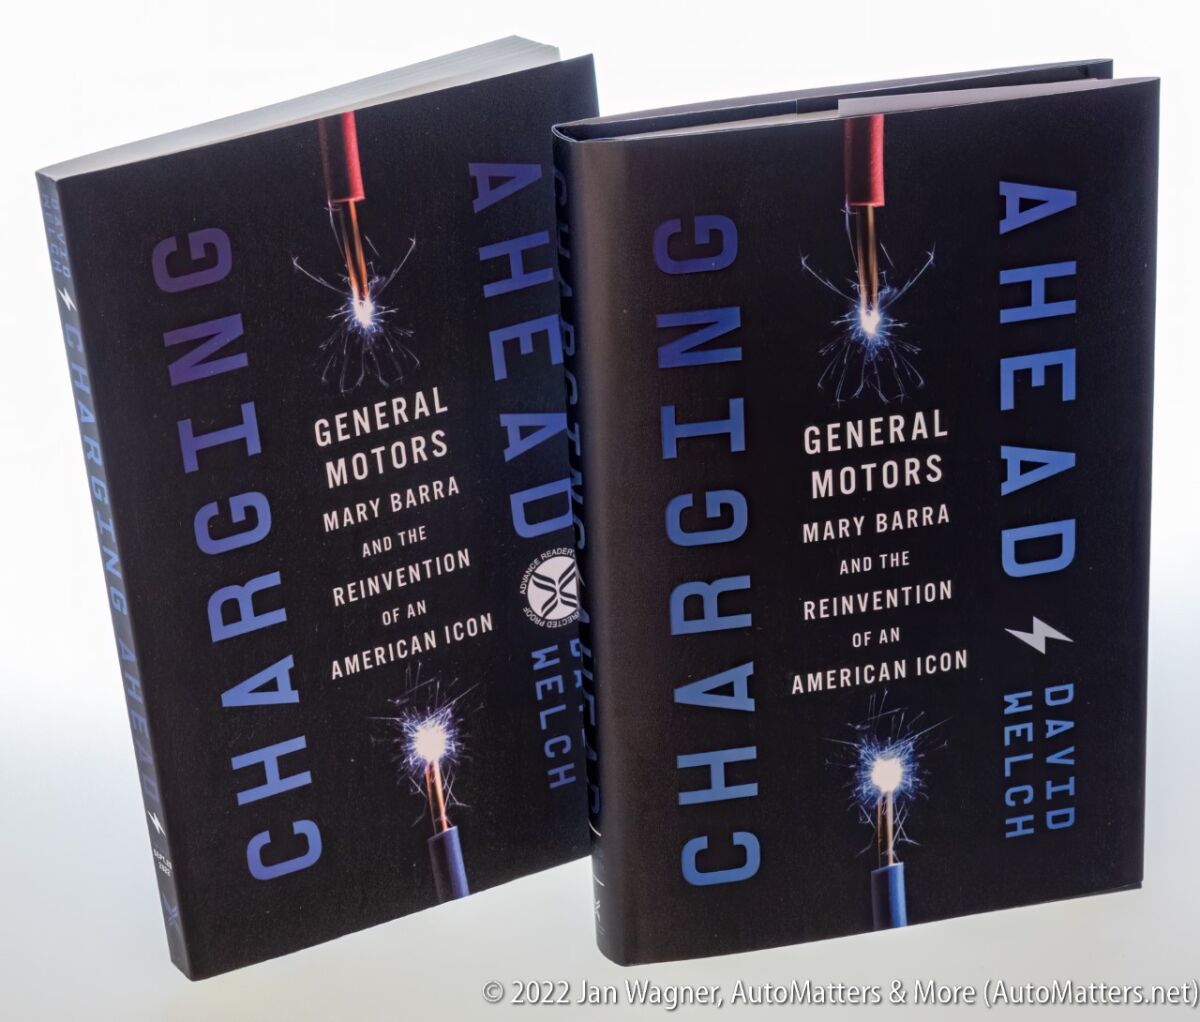 "Charging Ahead" book covers